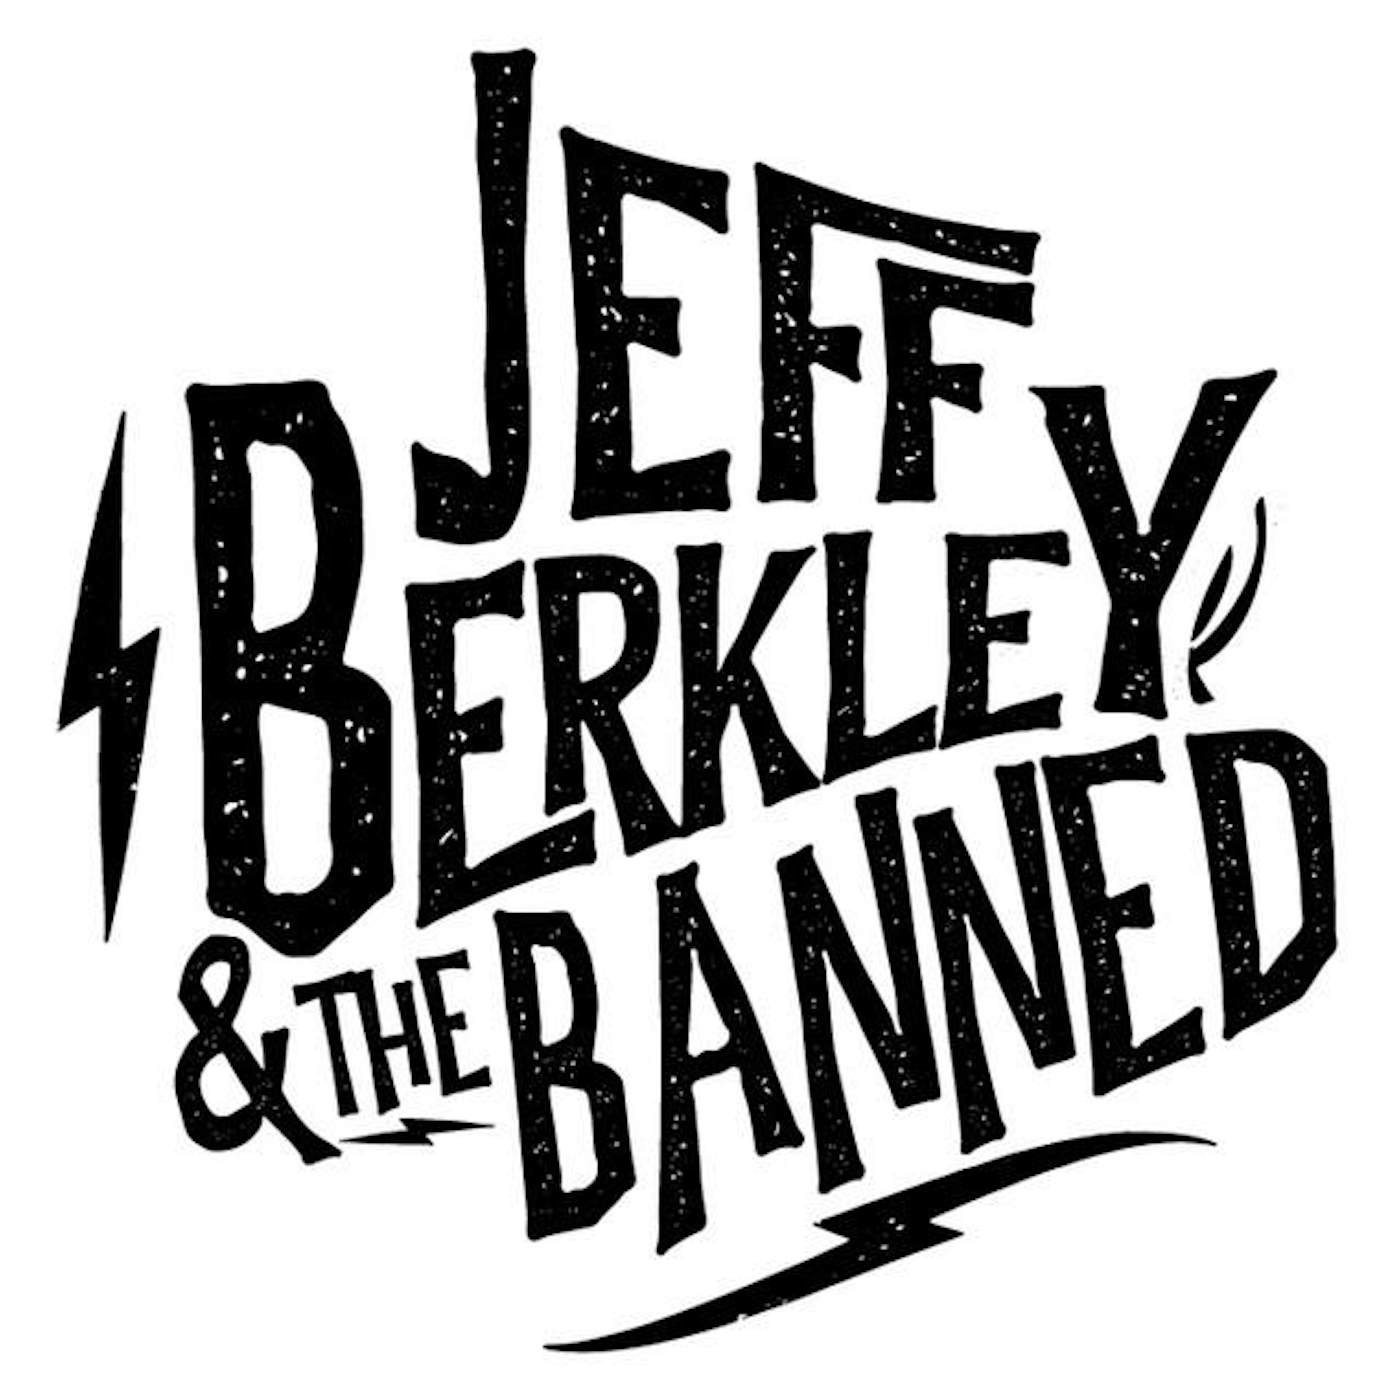 Jeff Berkley and the Banned